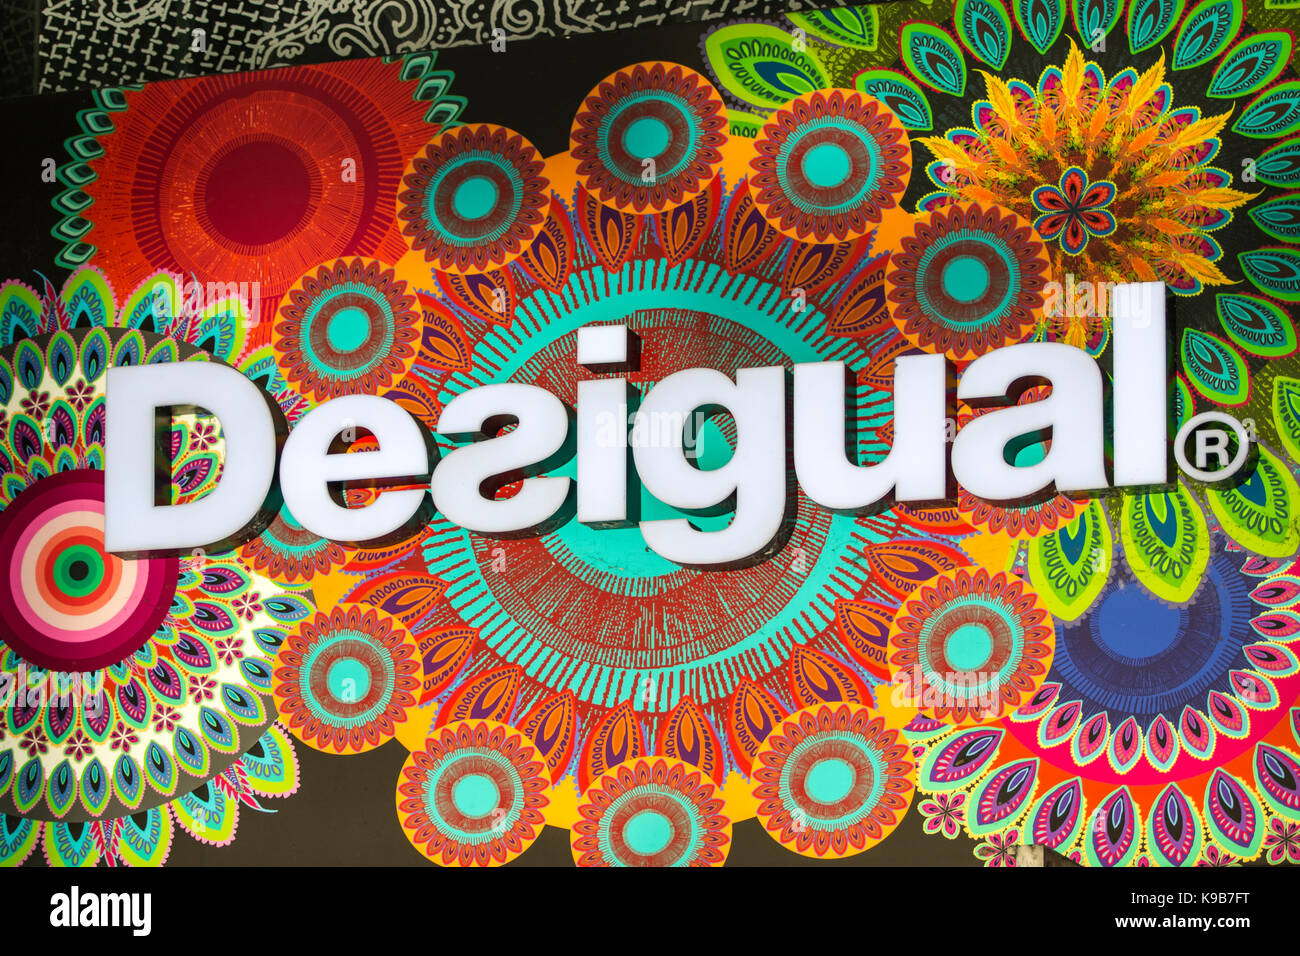 Desigual Shop Sign and Logo, Orchard Central Shopping Mall, Singapore Stock Photo